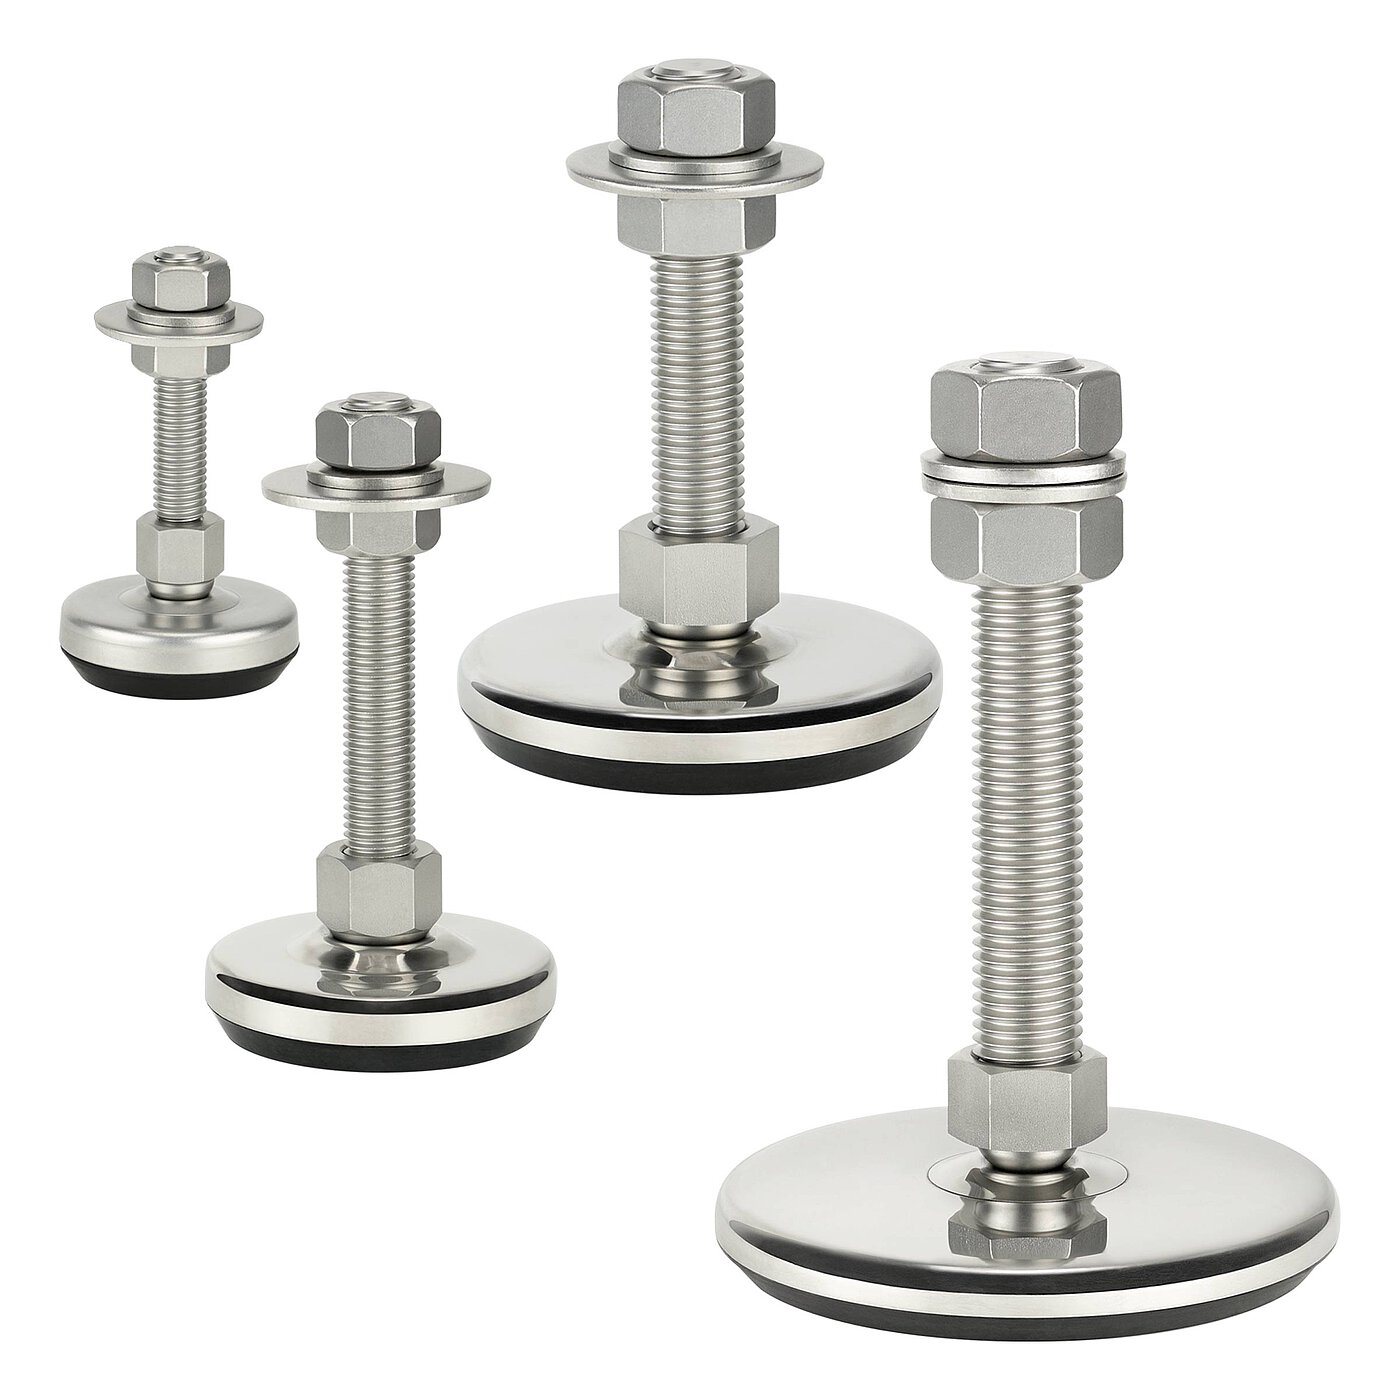 a group picture of four differently sized machine feet made of shiny stainless steel or matte-shiny, sandblasted stainless steel with various diameters at the base, thread in a pendulum-action cap nut atop the base plate and black elastomer NBR underneath the base plate, isolated on white background